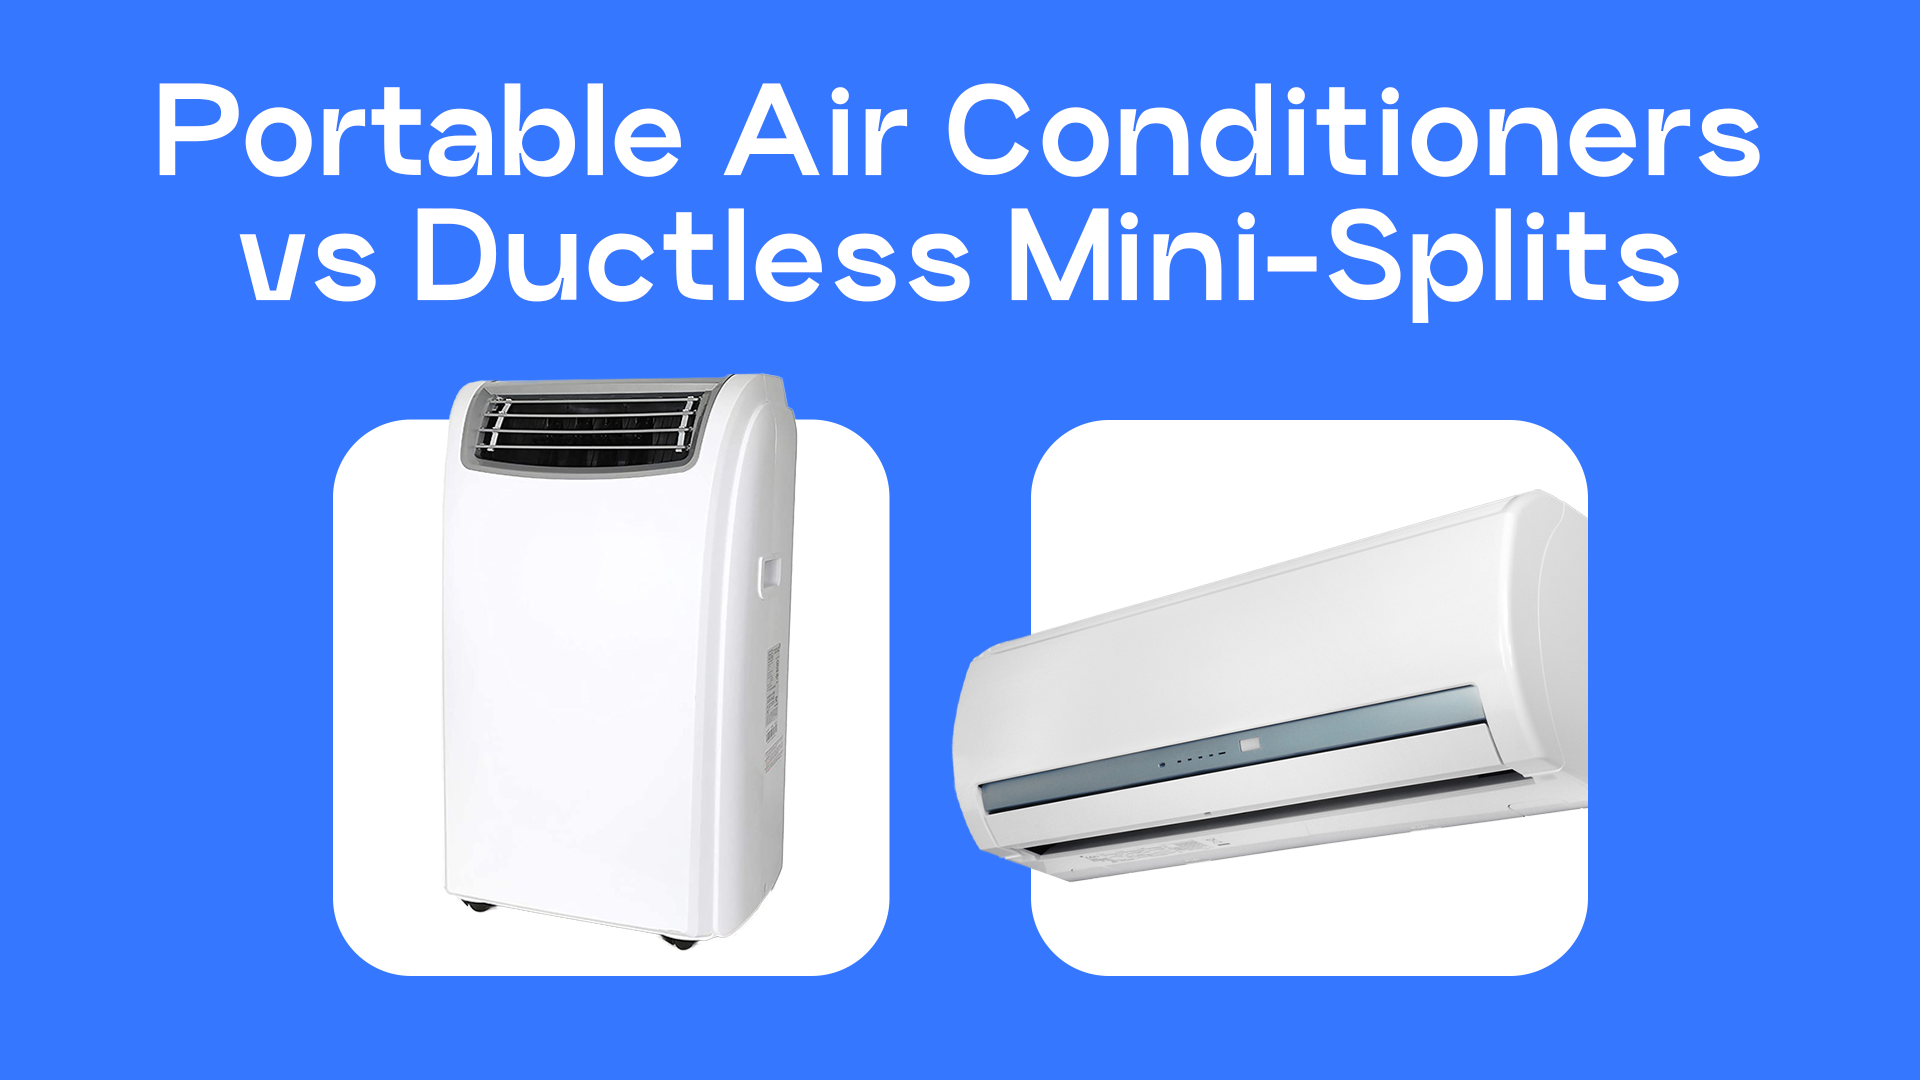 Portable Air Conditioners vs Ductless Mini-Splits